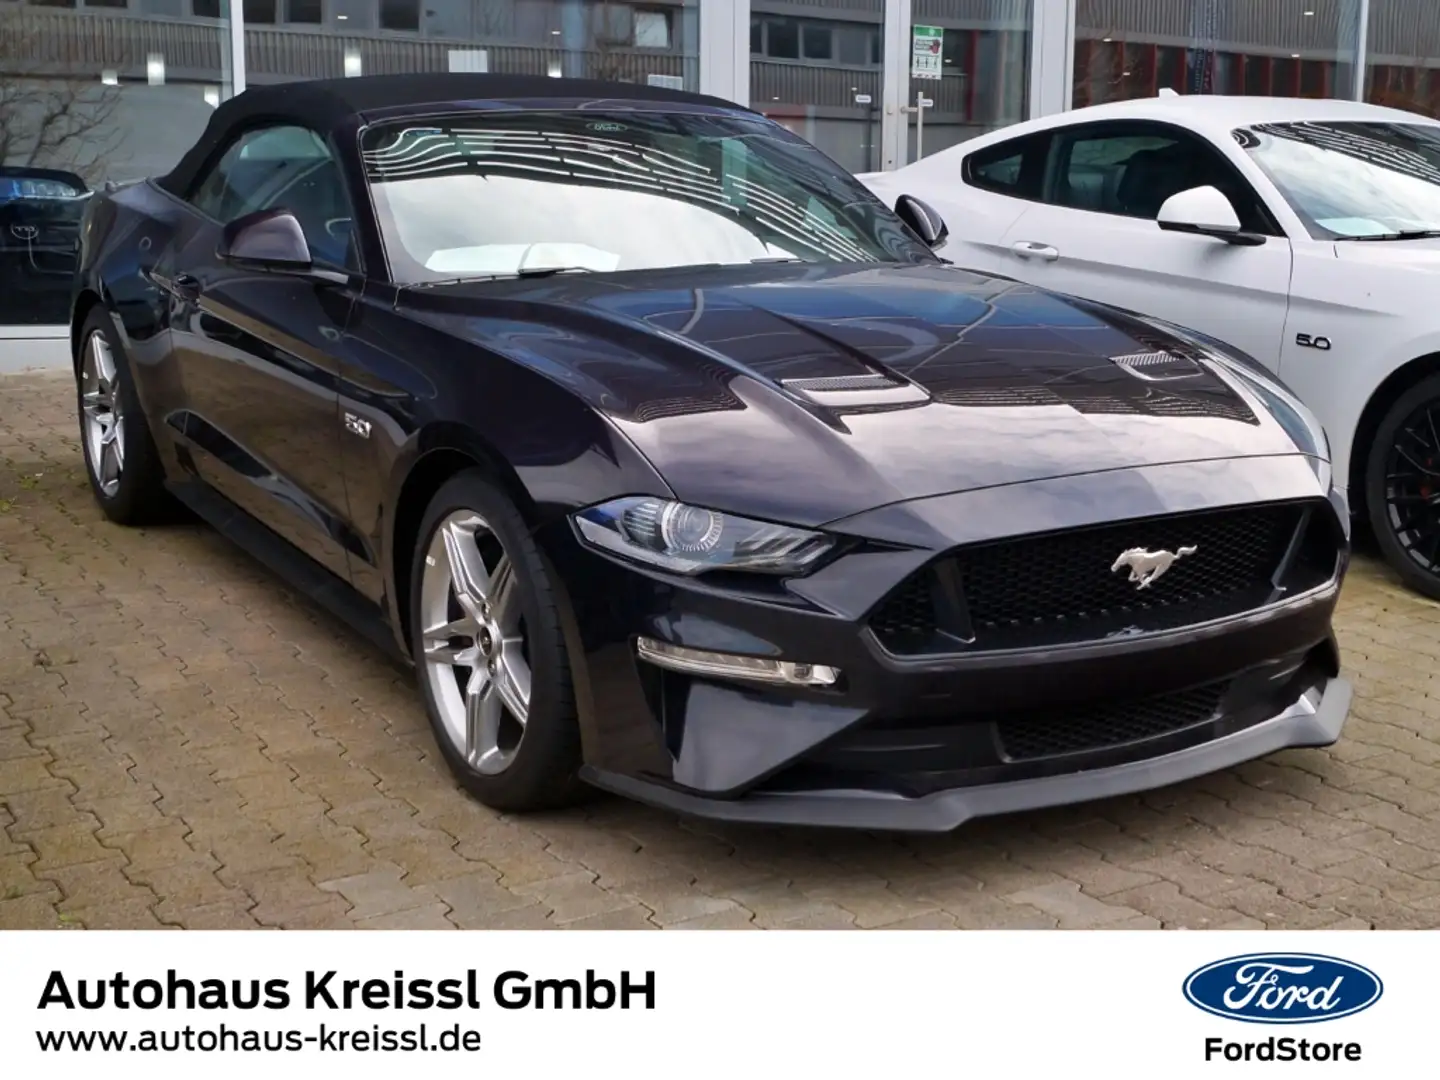 Ford Mustang Convertible GT 5.0 V8 Automatik MagneRide Mor - 2